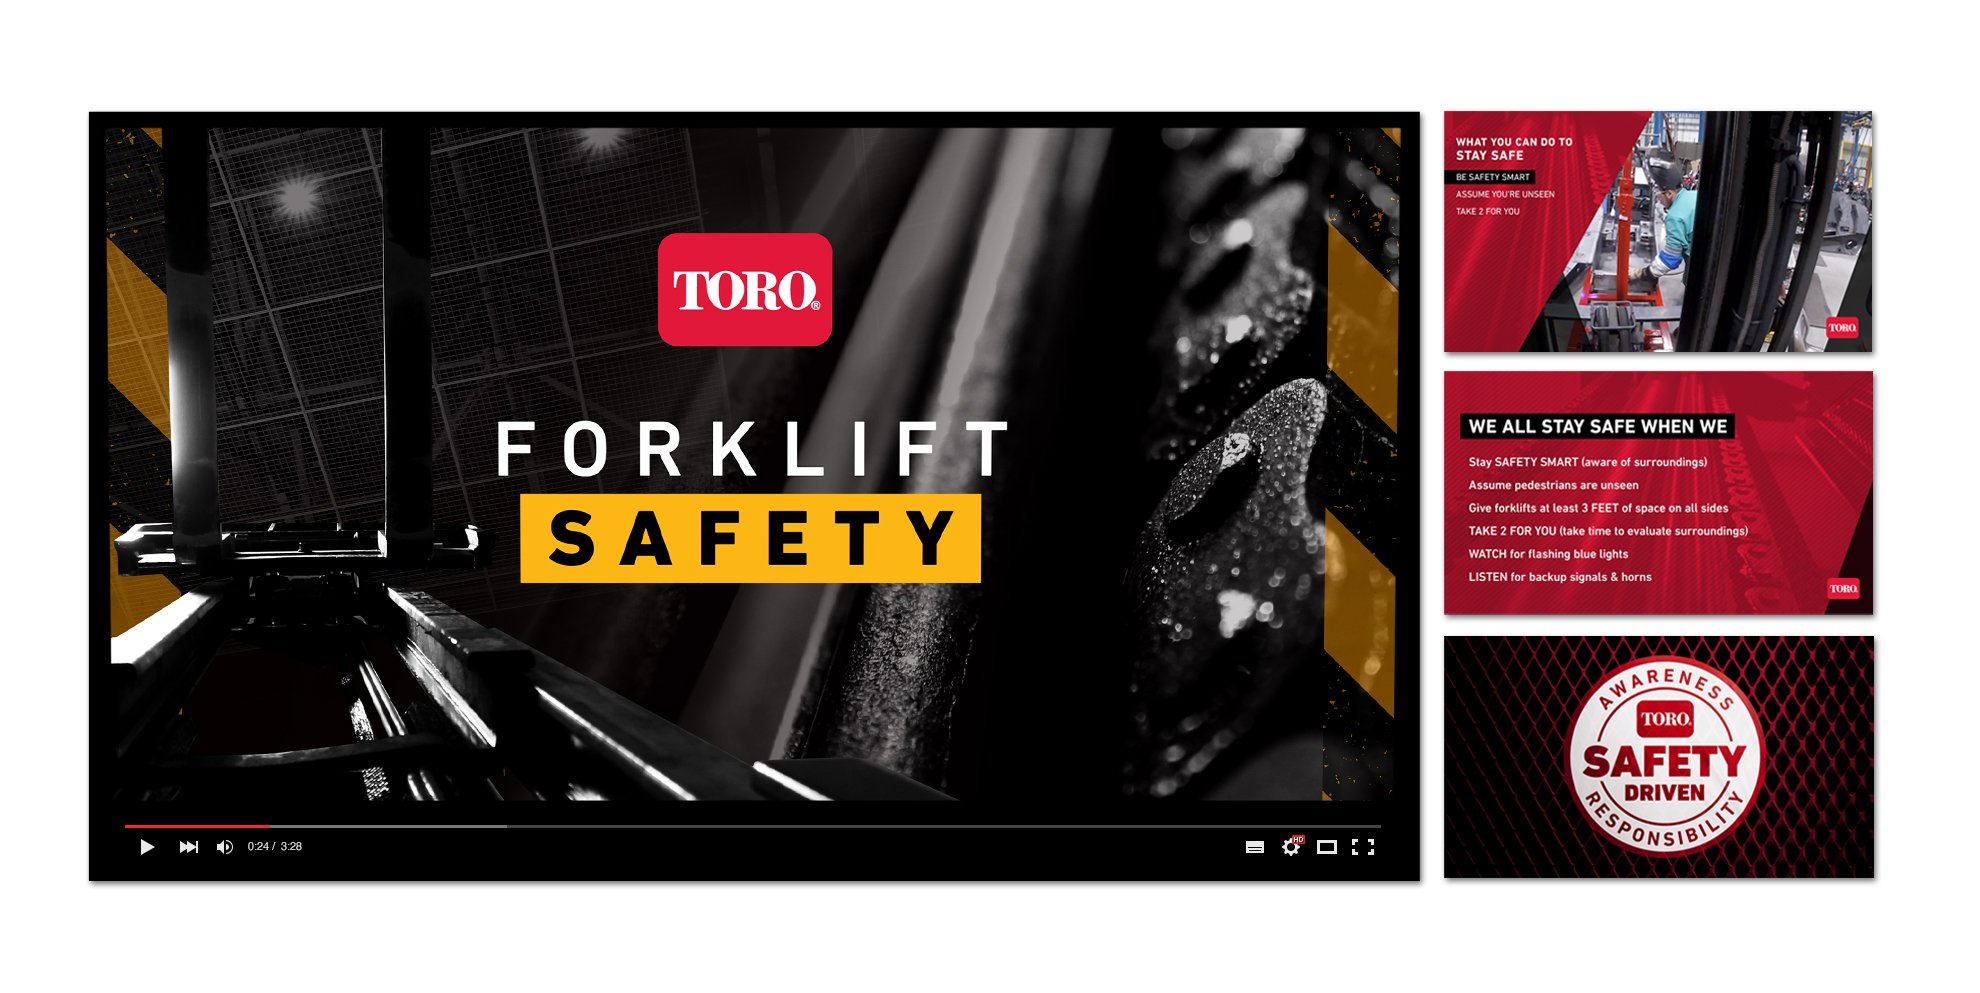 Four full-color stills from the Toro forklift safety video showing title card, on-screen text examples and Toro’s safety seal